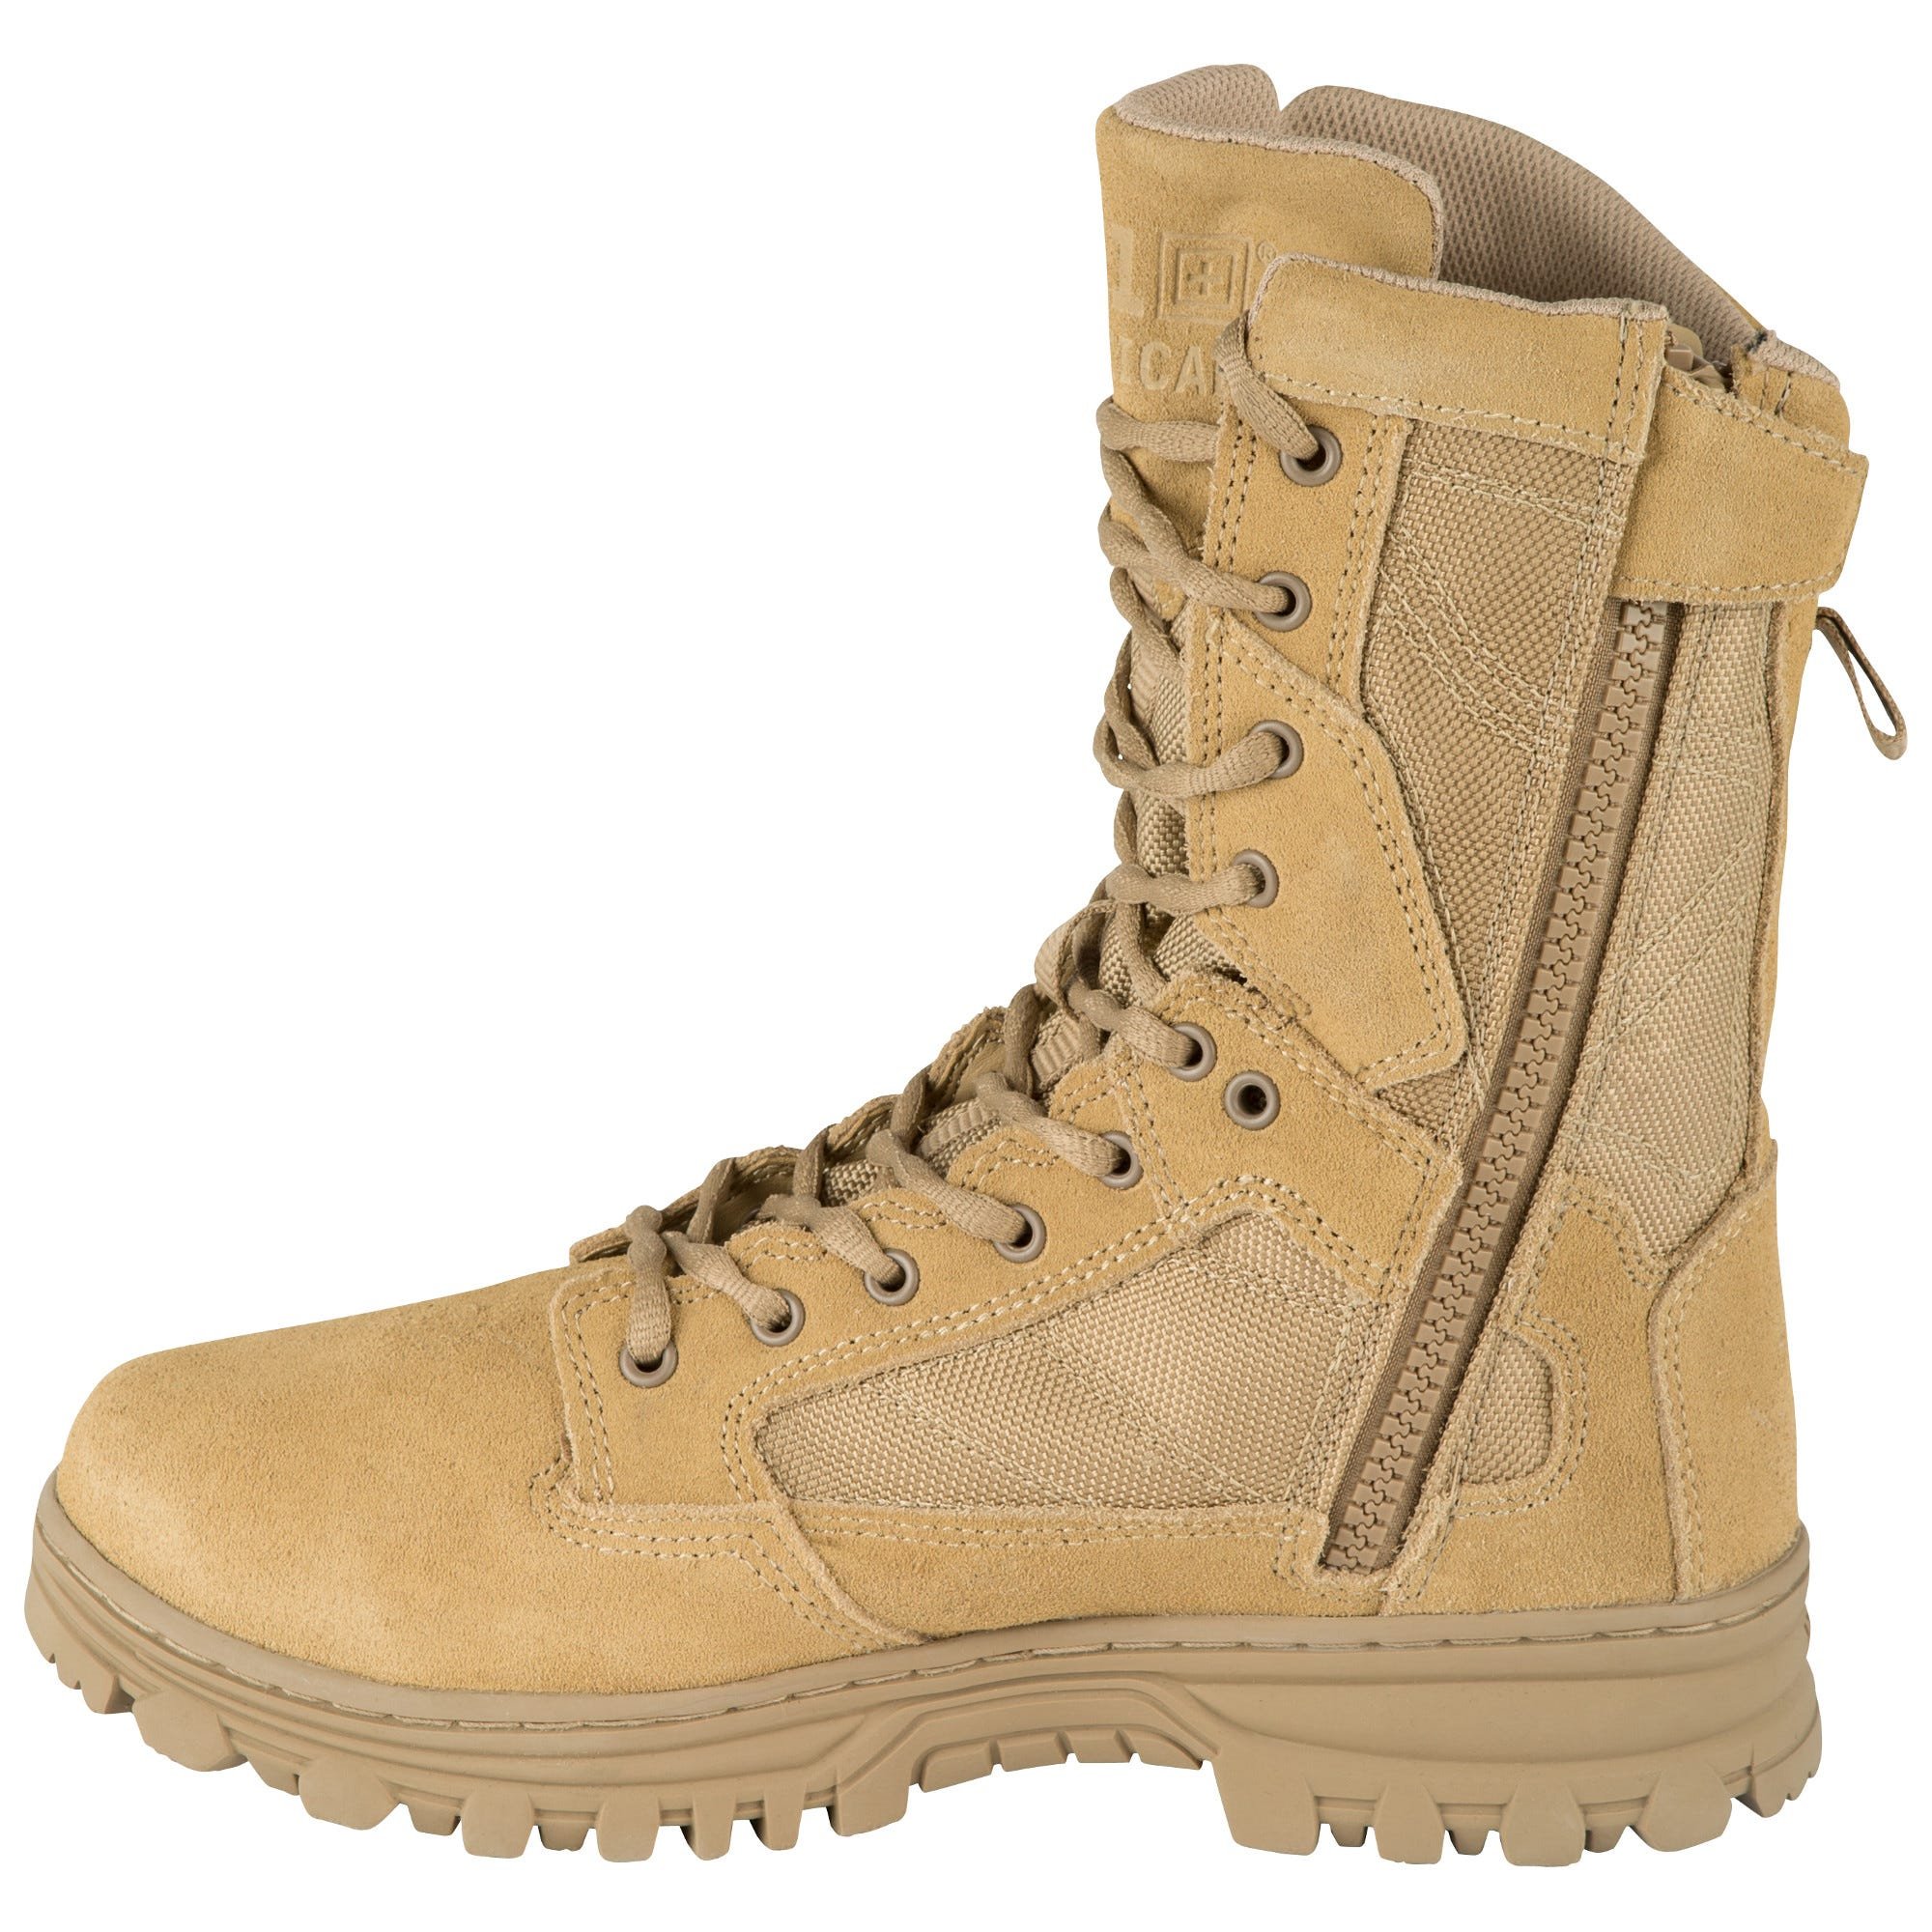 5.11 Work Gear EVO 8-Inch Waterproof Boots, Oil/Slip-Resistant, OrthoLite Insole, Coyote, 15/Regular, Style 12347 - image 4 of 4